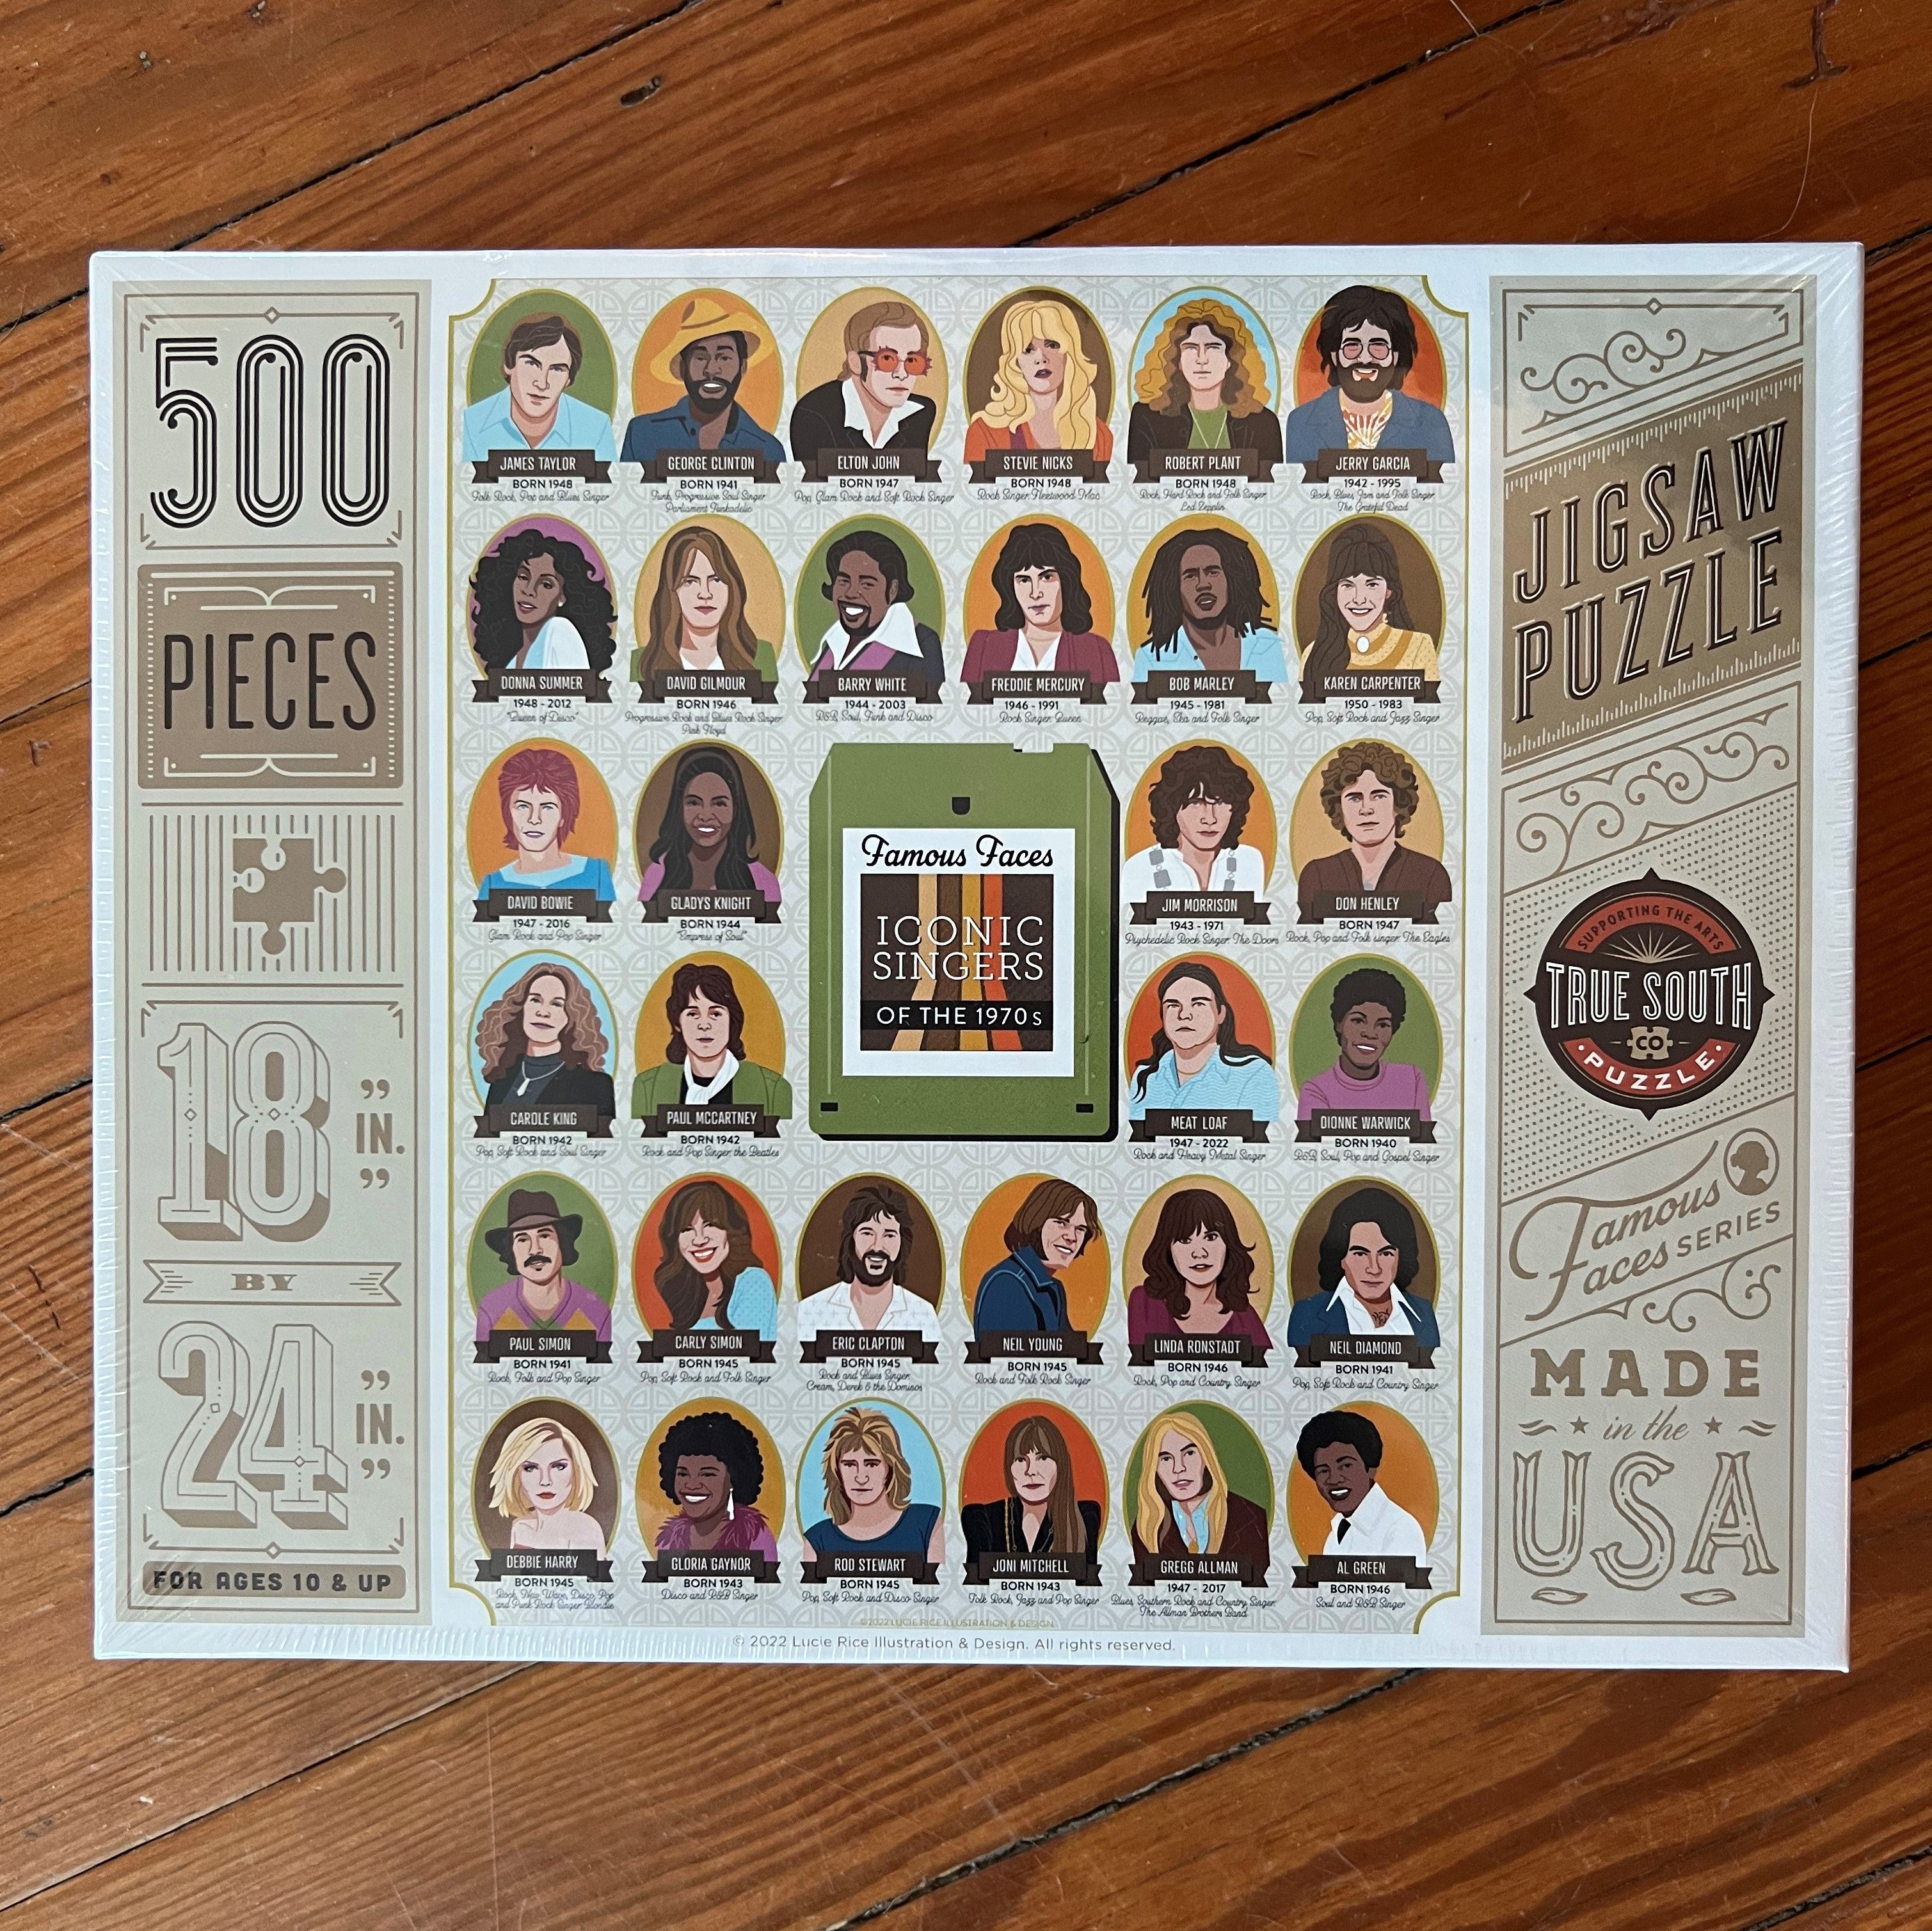 Iconic Singers of the 1970s Puzzle